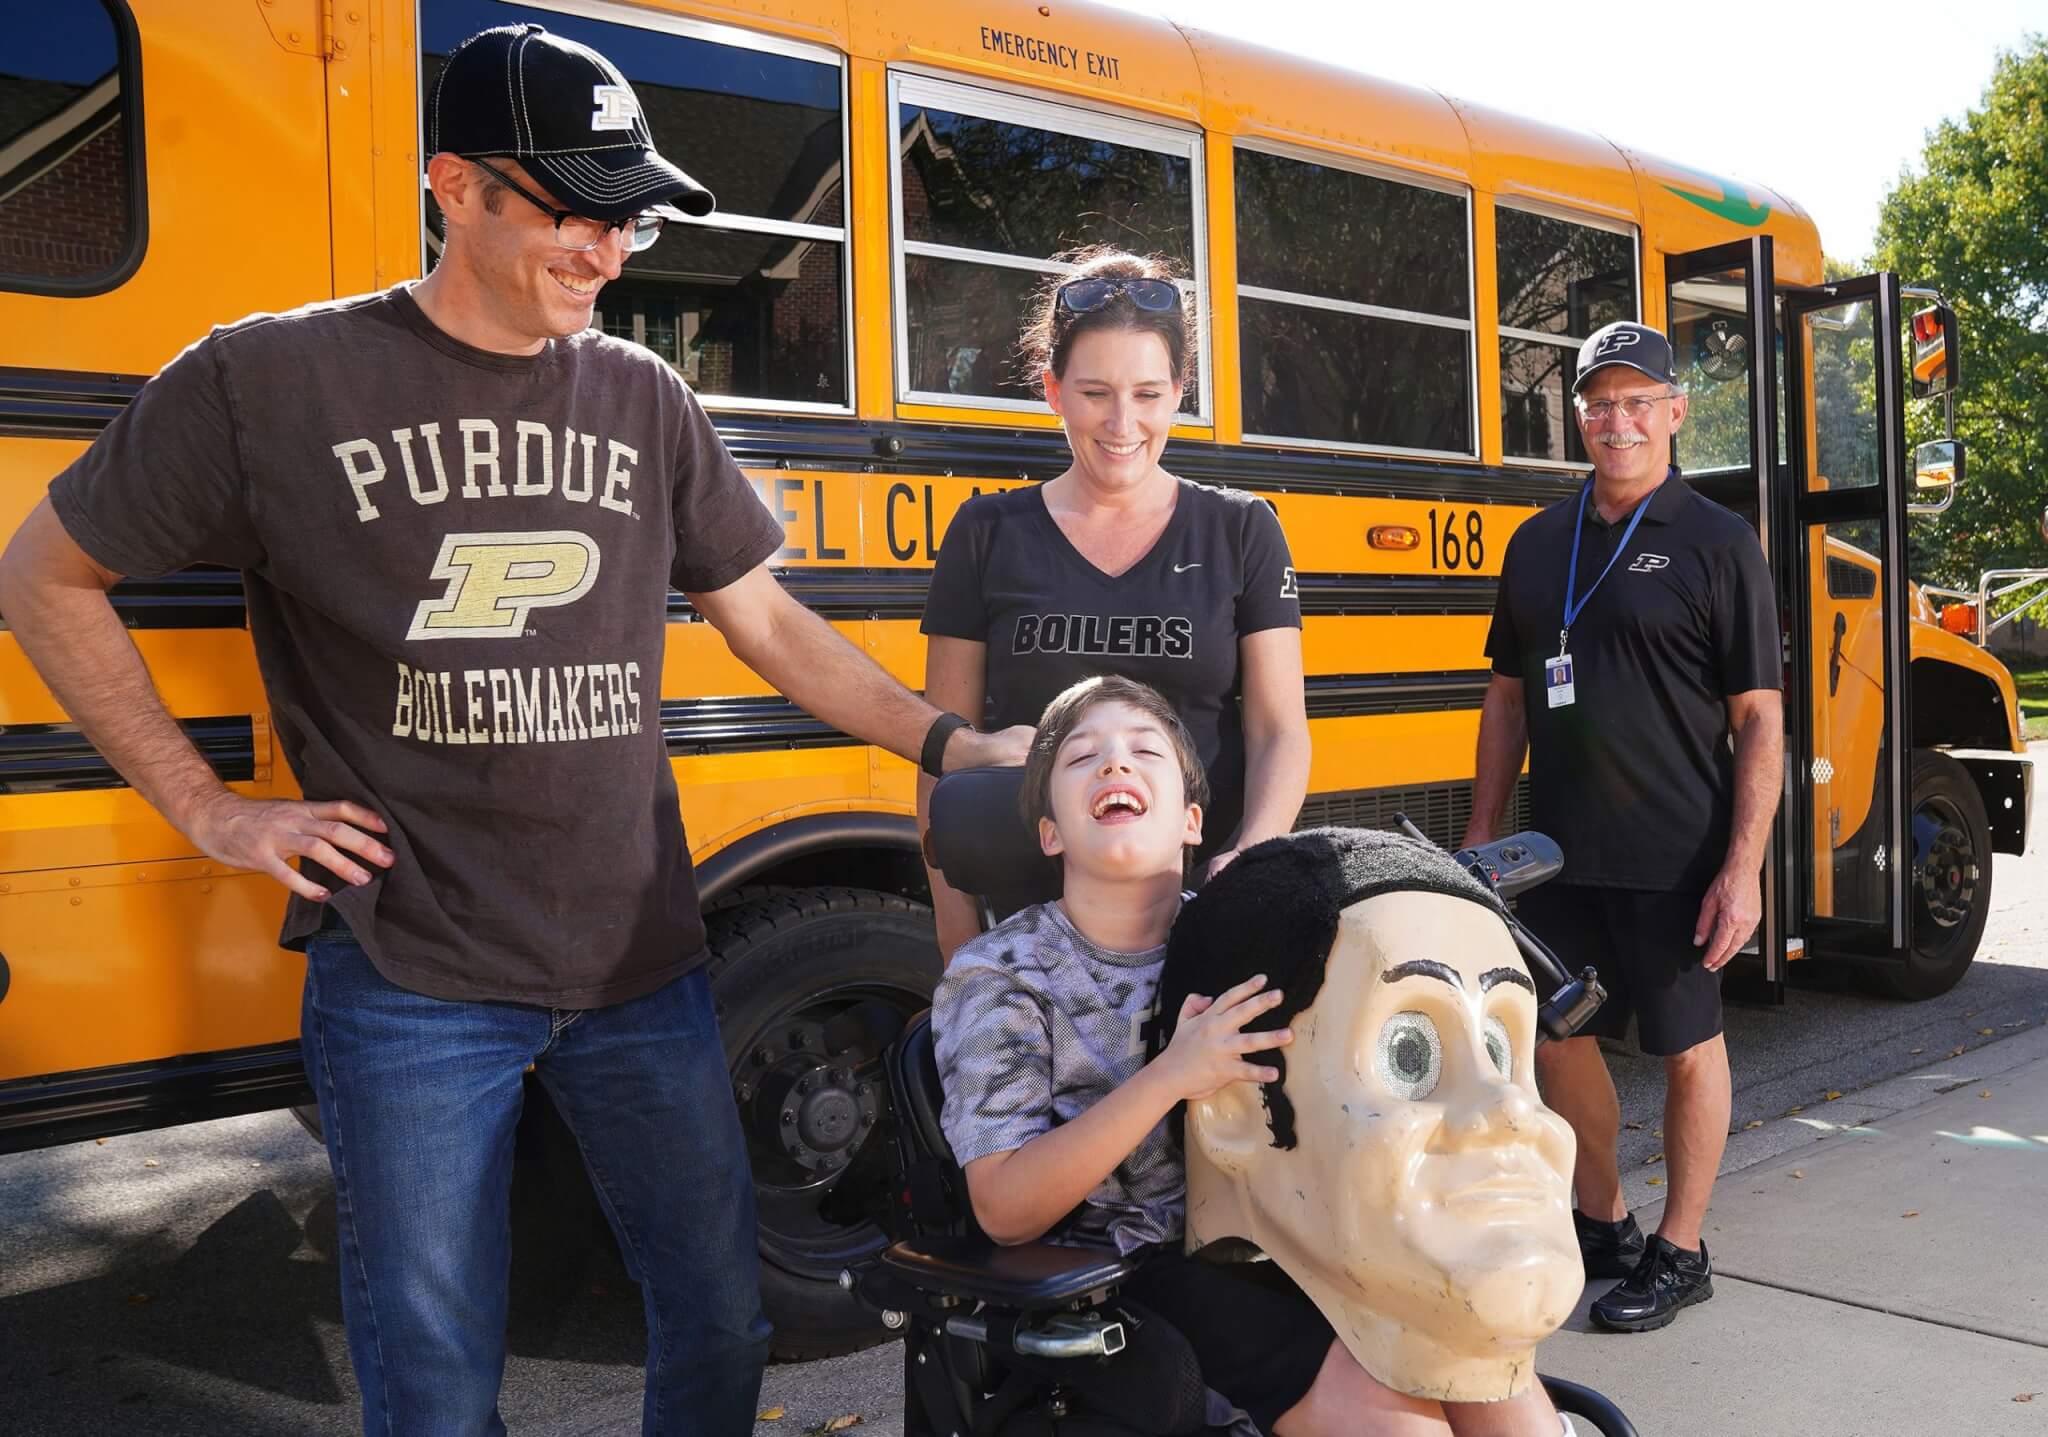 Once Carmel, Ind. bus driver Van Betulius (right) told Todd, Liz and Brayden Krueger he had once been Purdue Pete, they all became Boiler buddies for life. (Photo by Tom Campbell)